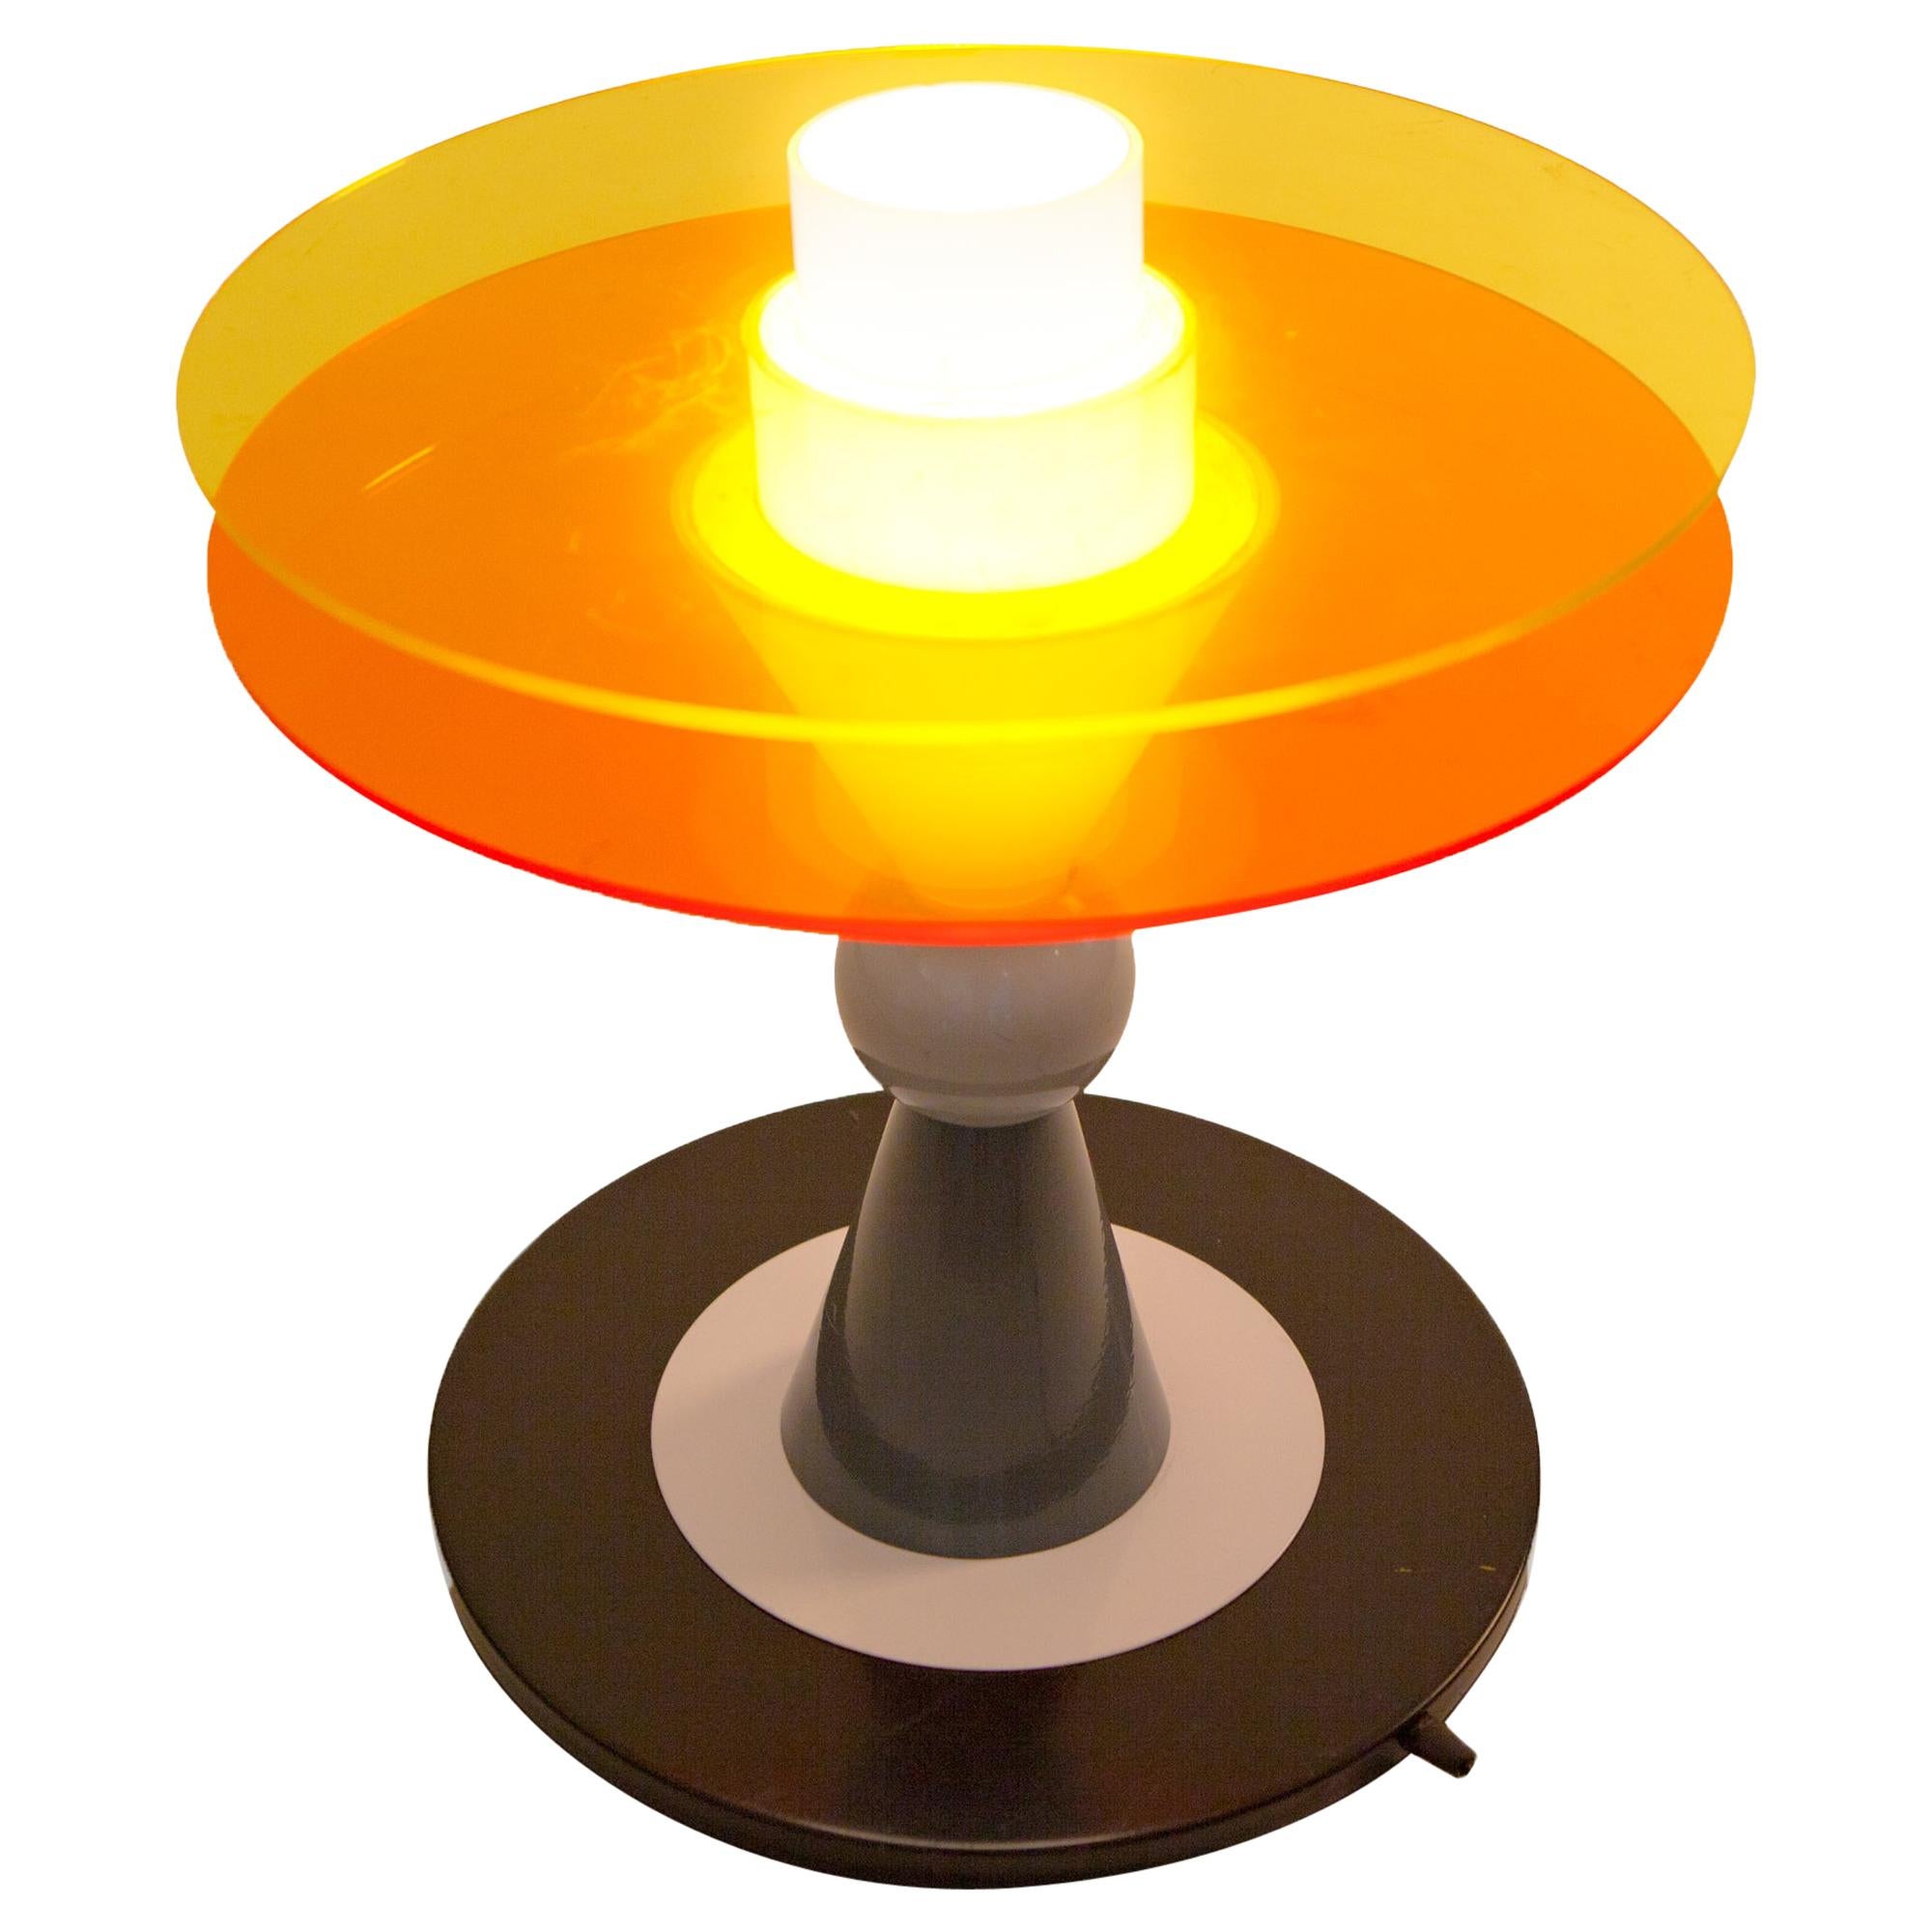 Bay Table Lamp USA, 110 Volts, by Ettore Sottsass for Memphis Milano Collection